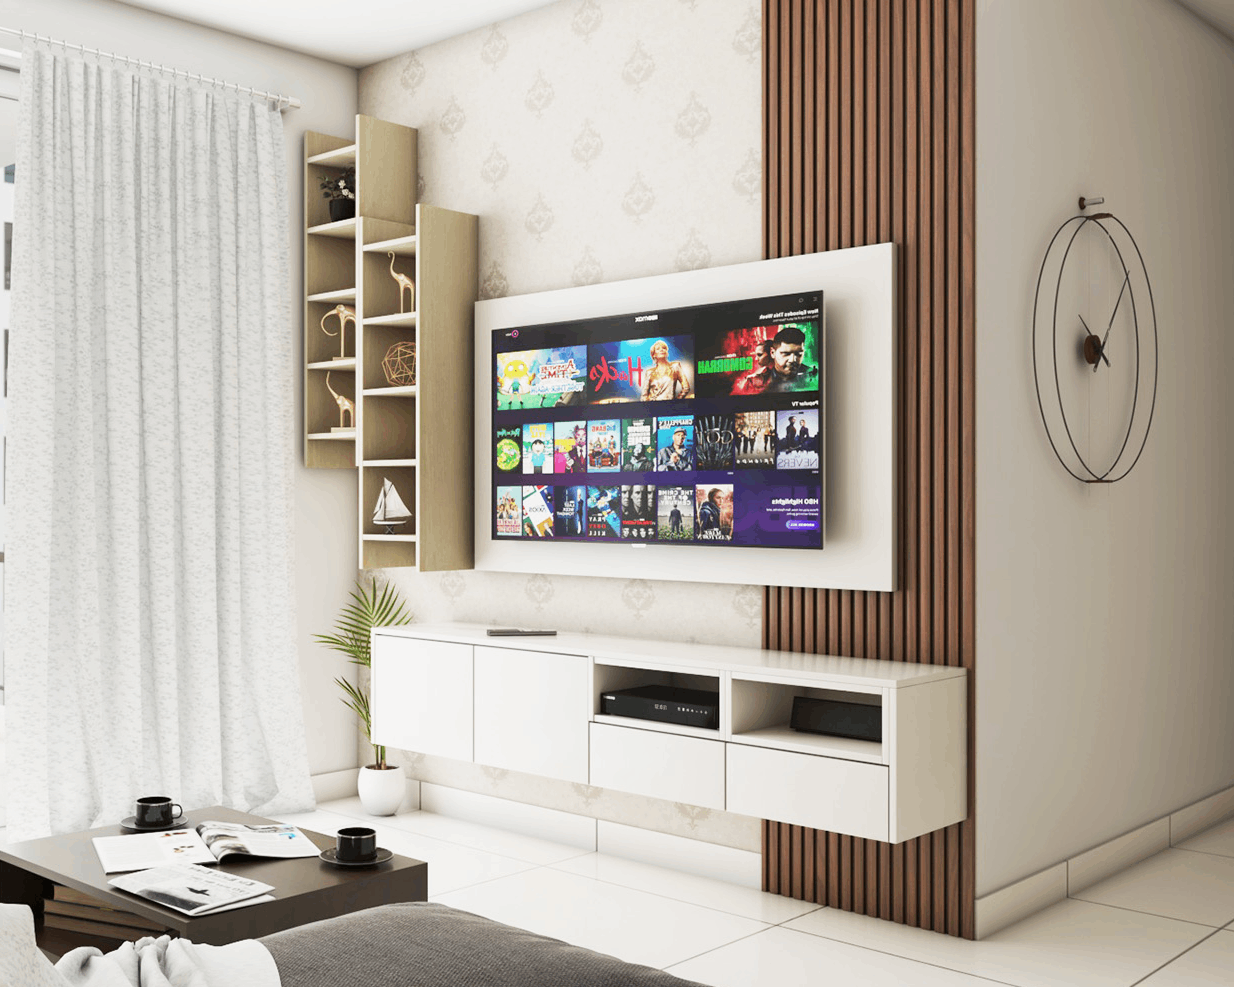 Modern Wall-Mounted TV Unit Design With Open Shelves